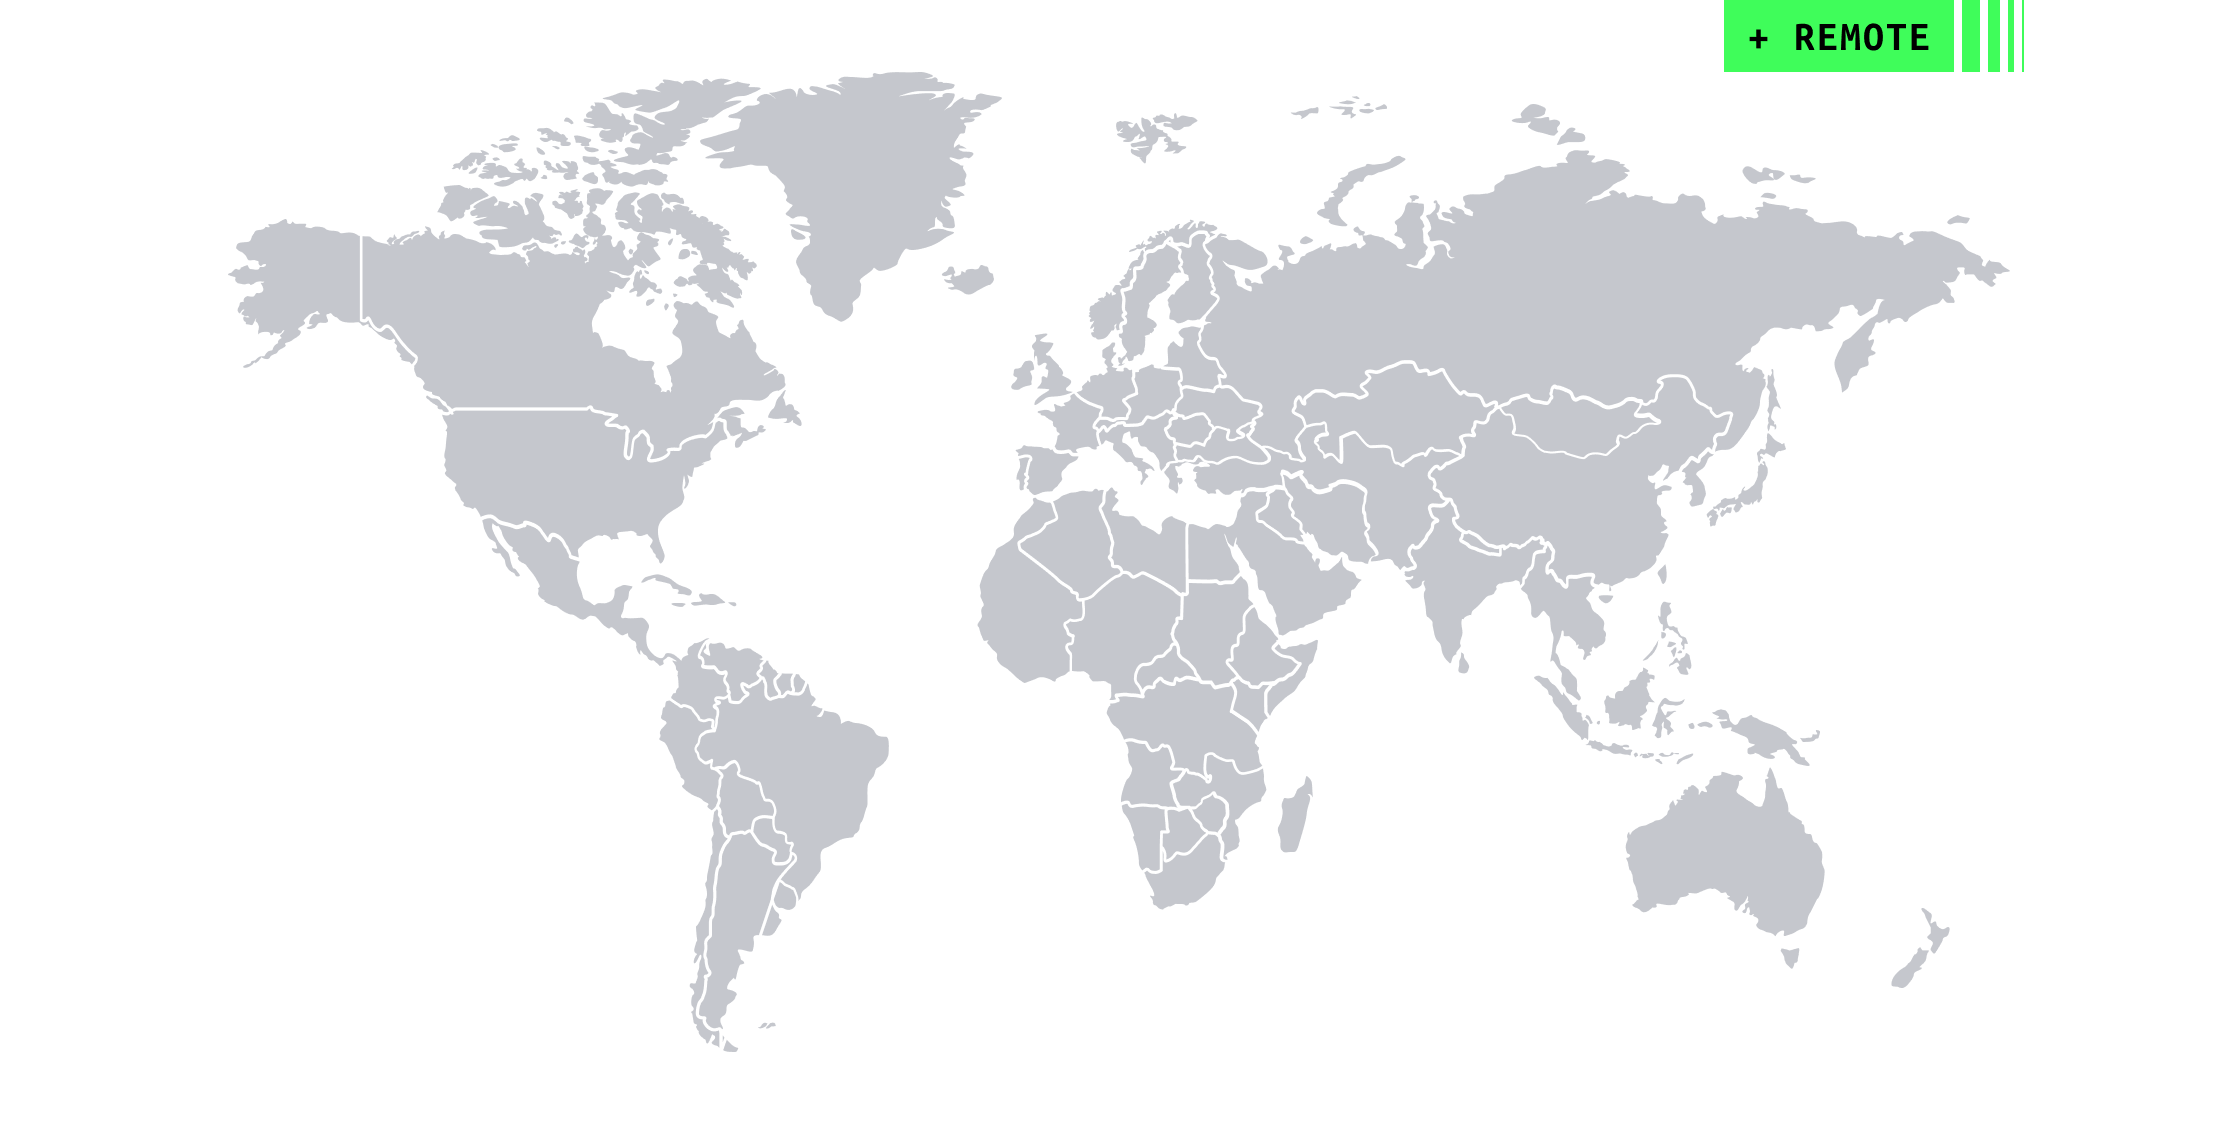 Office locations on a world map: San Francisco, US; London, UK; Groningen, NL; and remote.